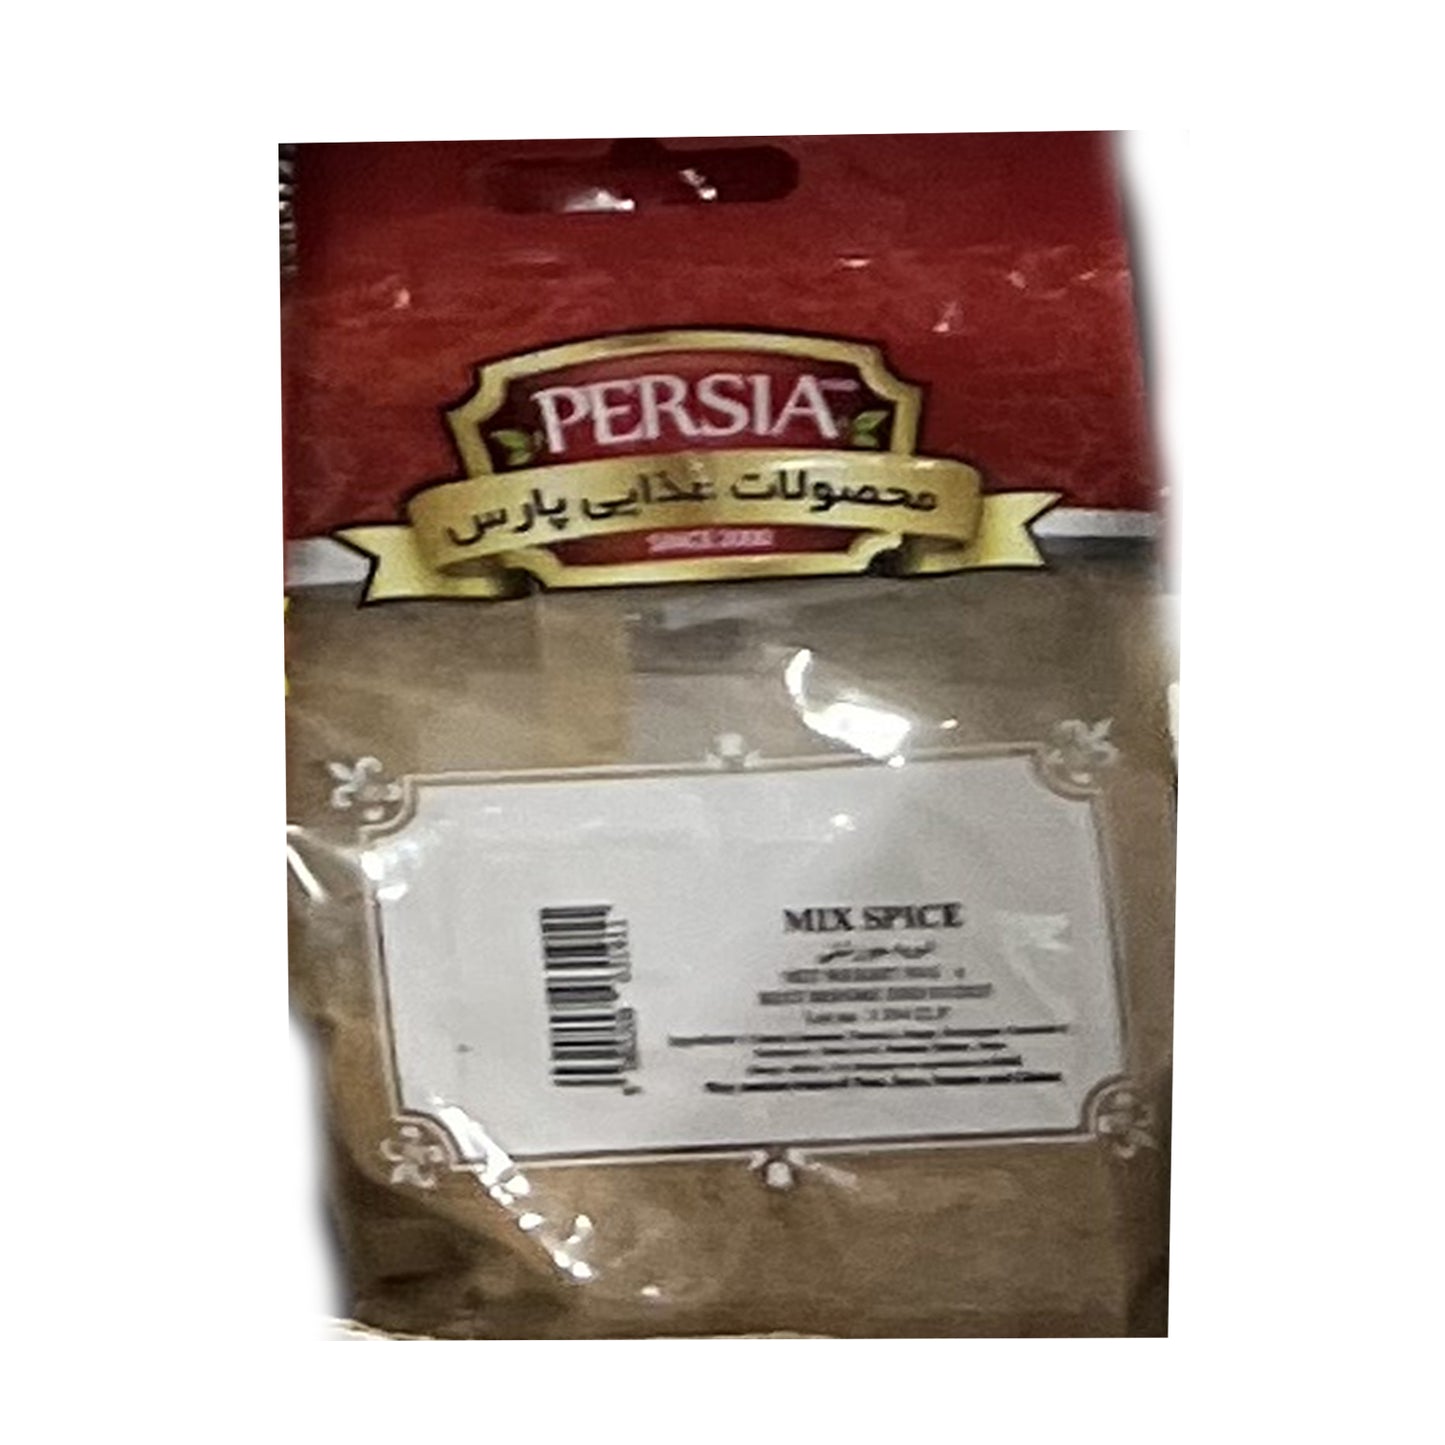 Persia Food Mix Spice